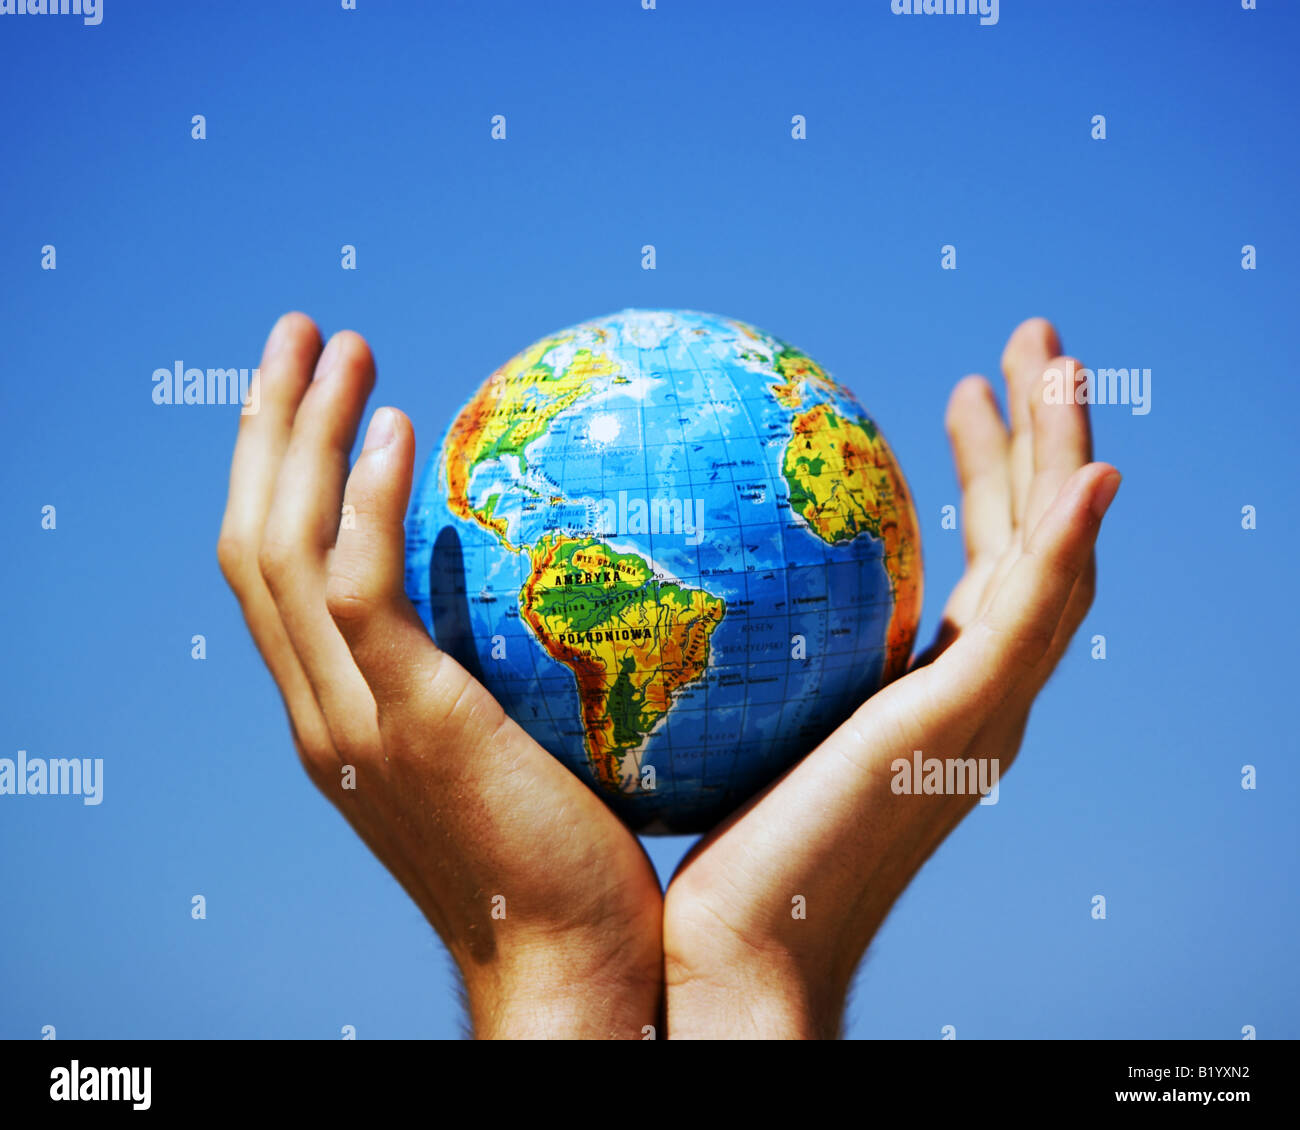 Earth globe in hands protected. Globe protection concept, recycling, world issues, environment / environmental themes Stock Photo